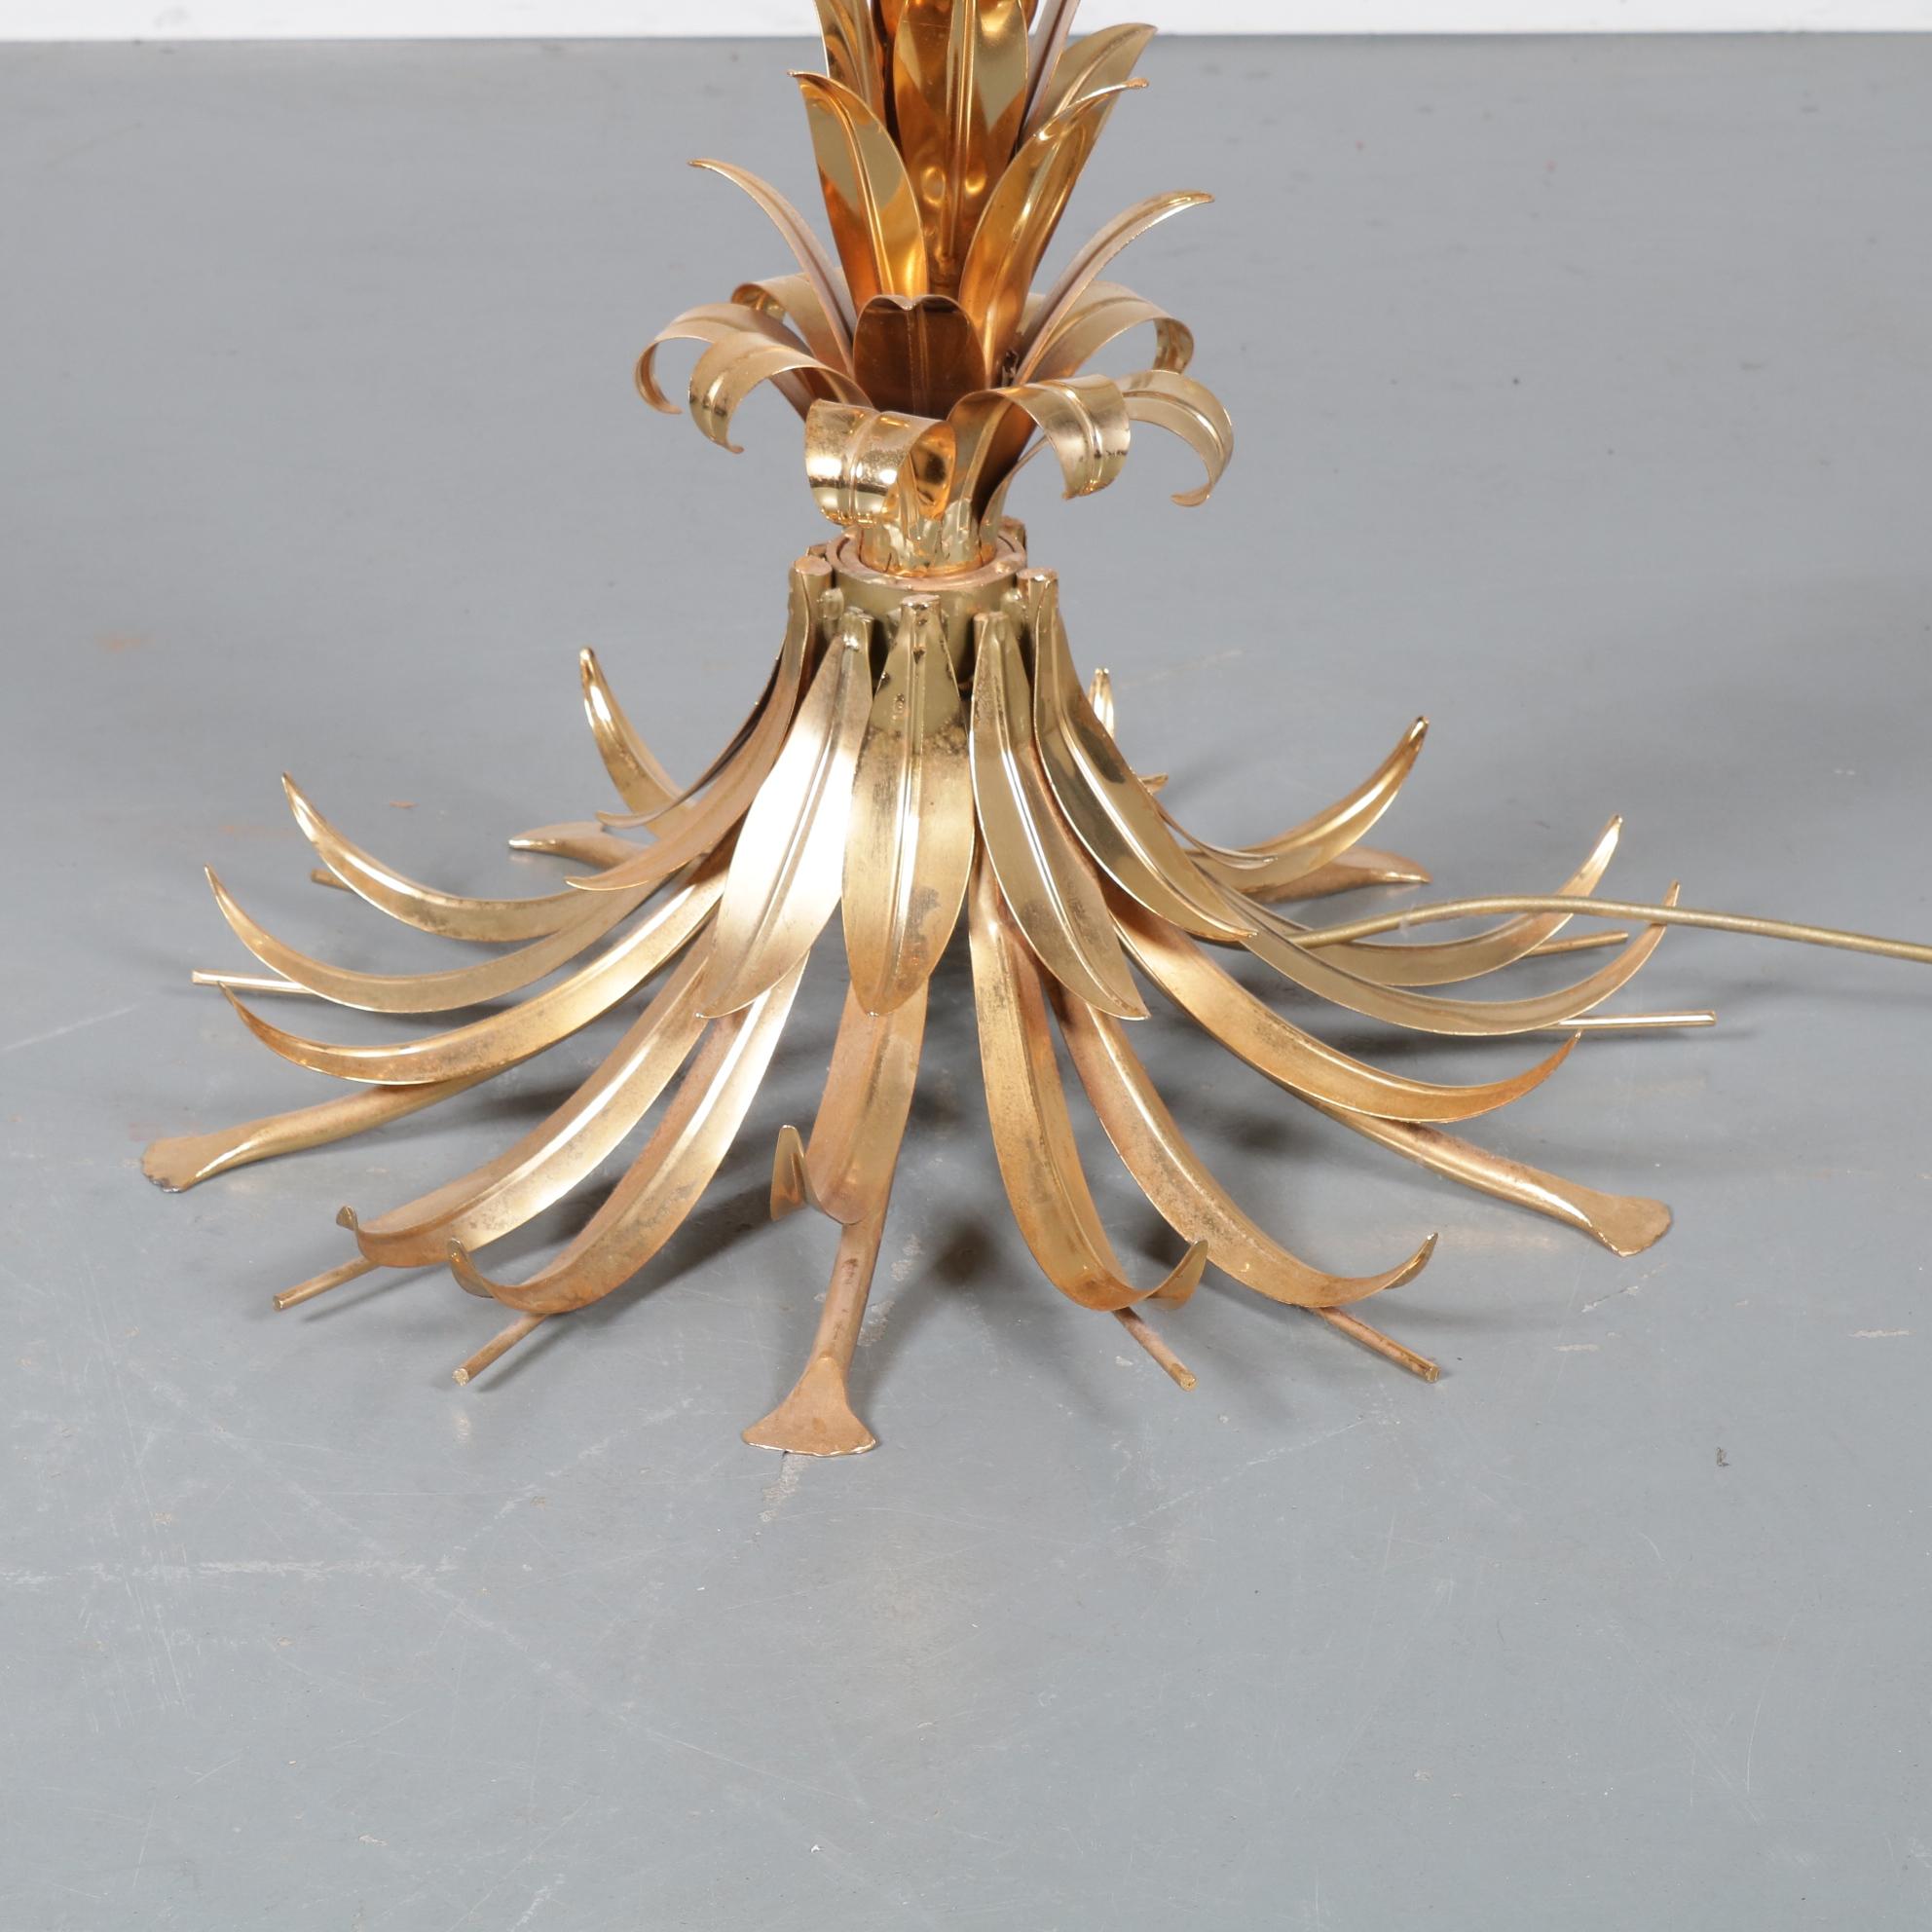 This luxurious, palm tree shaped lamp is designed by Hans Kögl and manufactured in Germany, circa 1970.

This sculptural lamp is completely made of high quality brass with a very nice golden color. When switched on, the light bulbs hidden in the